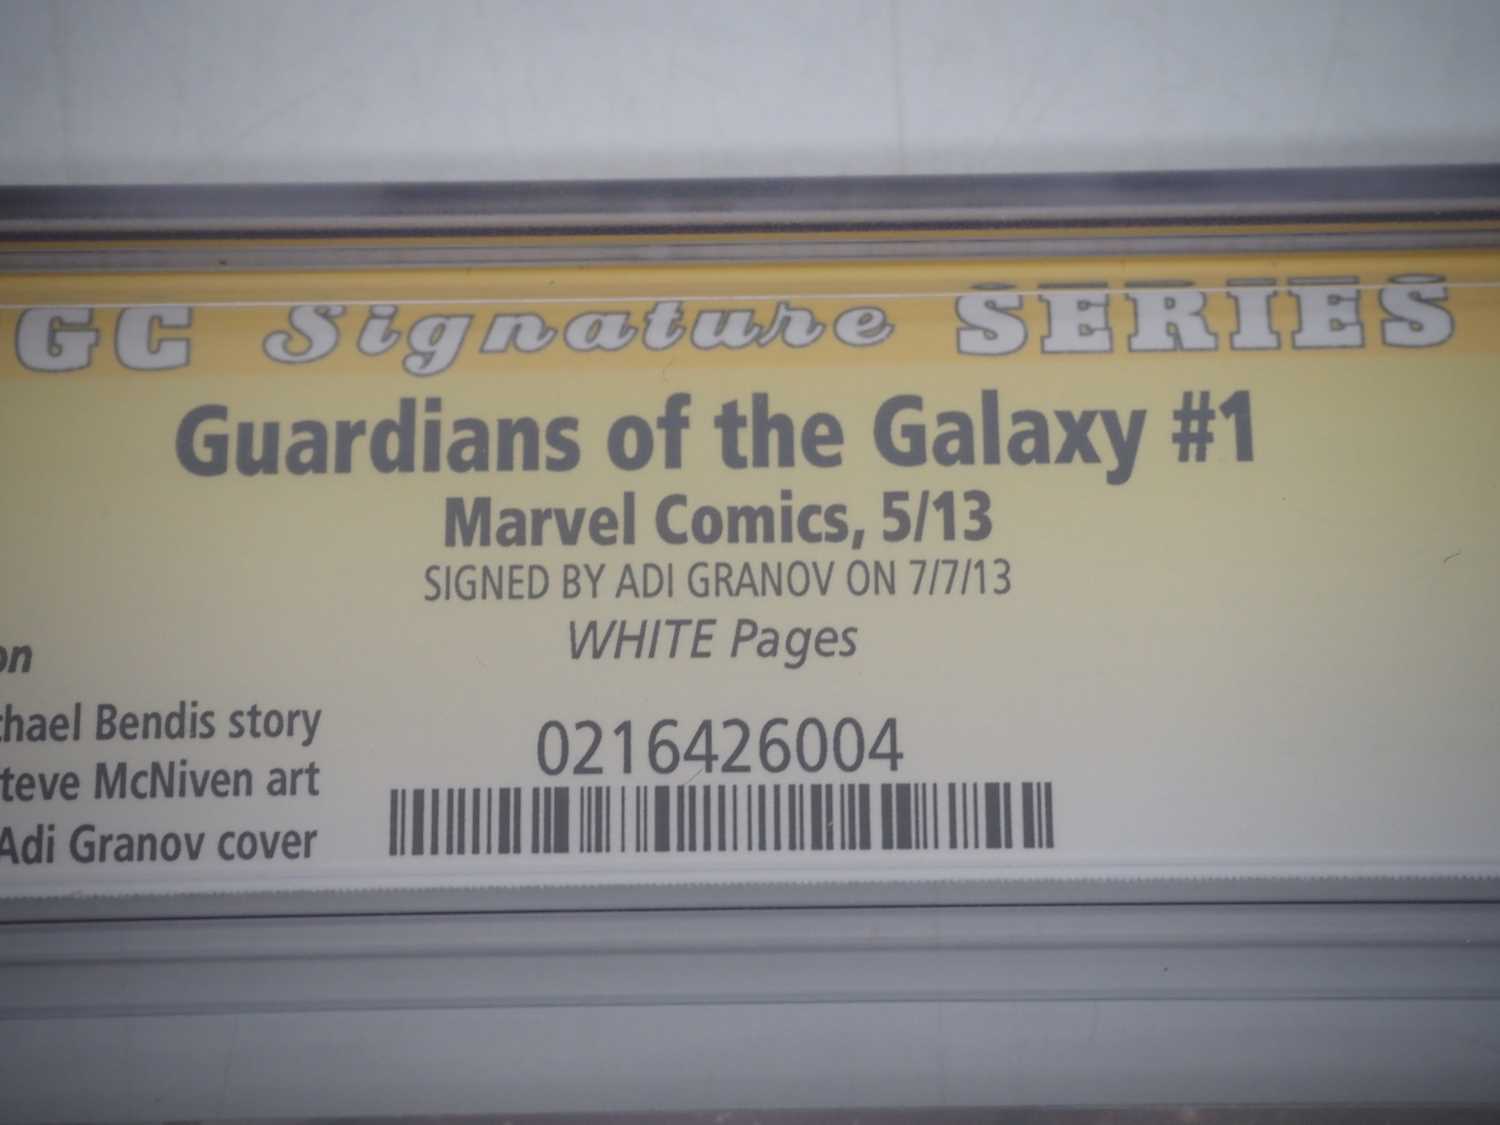 GUARDIANS OF THE GALAXY VOL. 3 #1 (2013 - MARVEL) - GRADED 9.8(NM/MINT) by CGC SIGNATURE SERIES - - Image 4 of 5